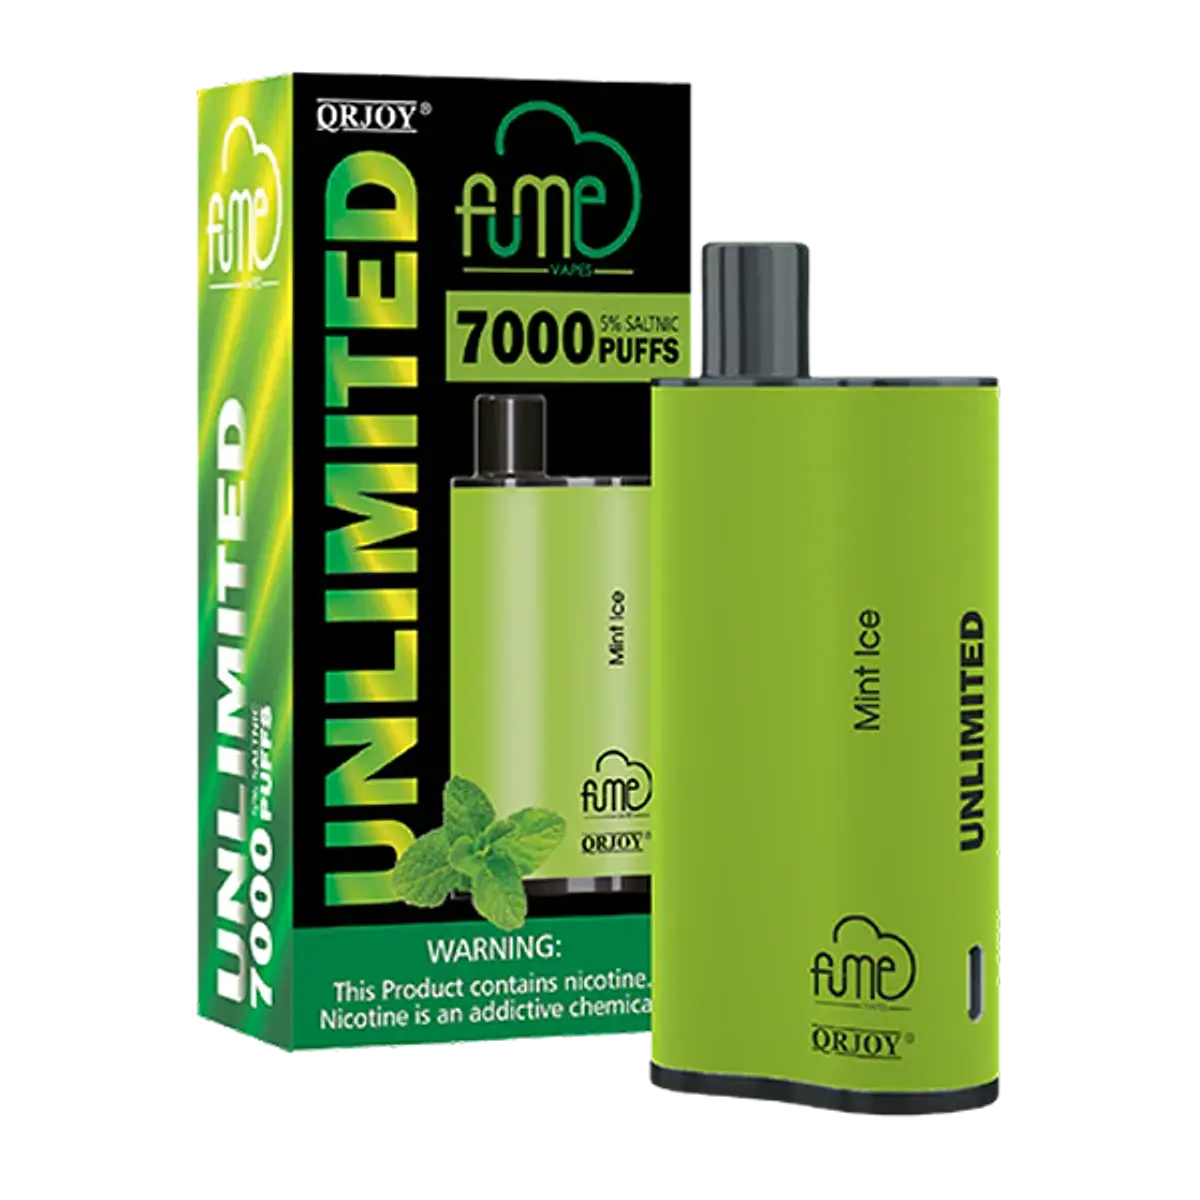 Experience Long-Lasting Refreshment with the Fume Unlimited 7000 Puffs Mint Ice Device